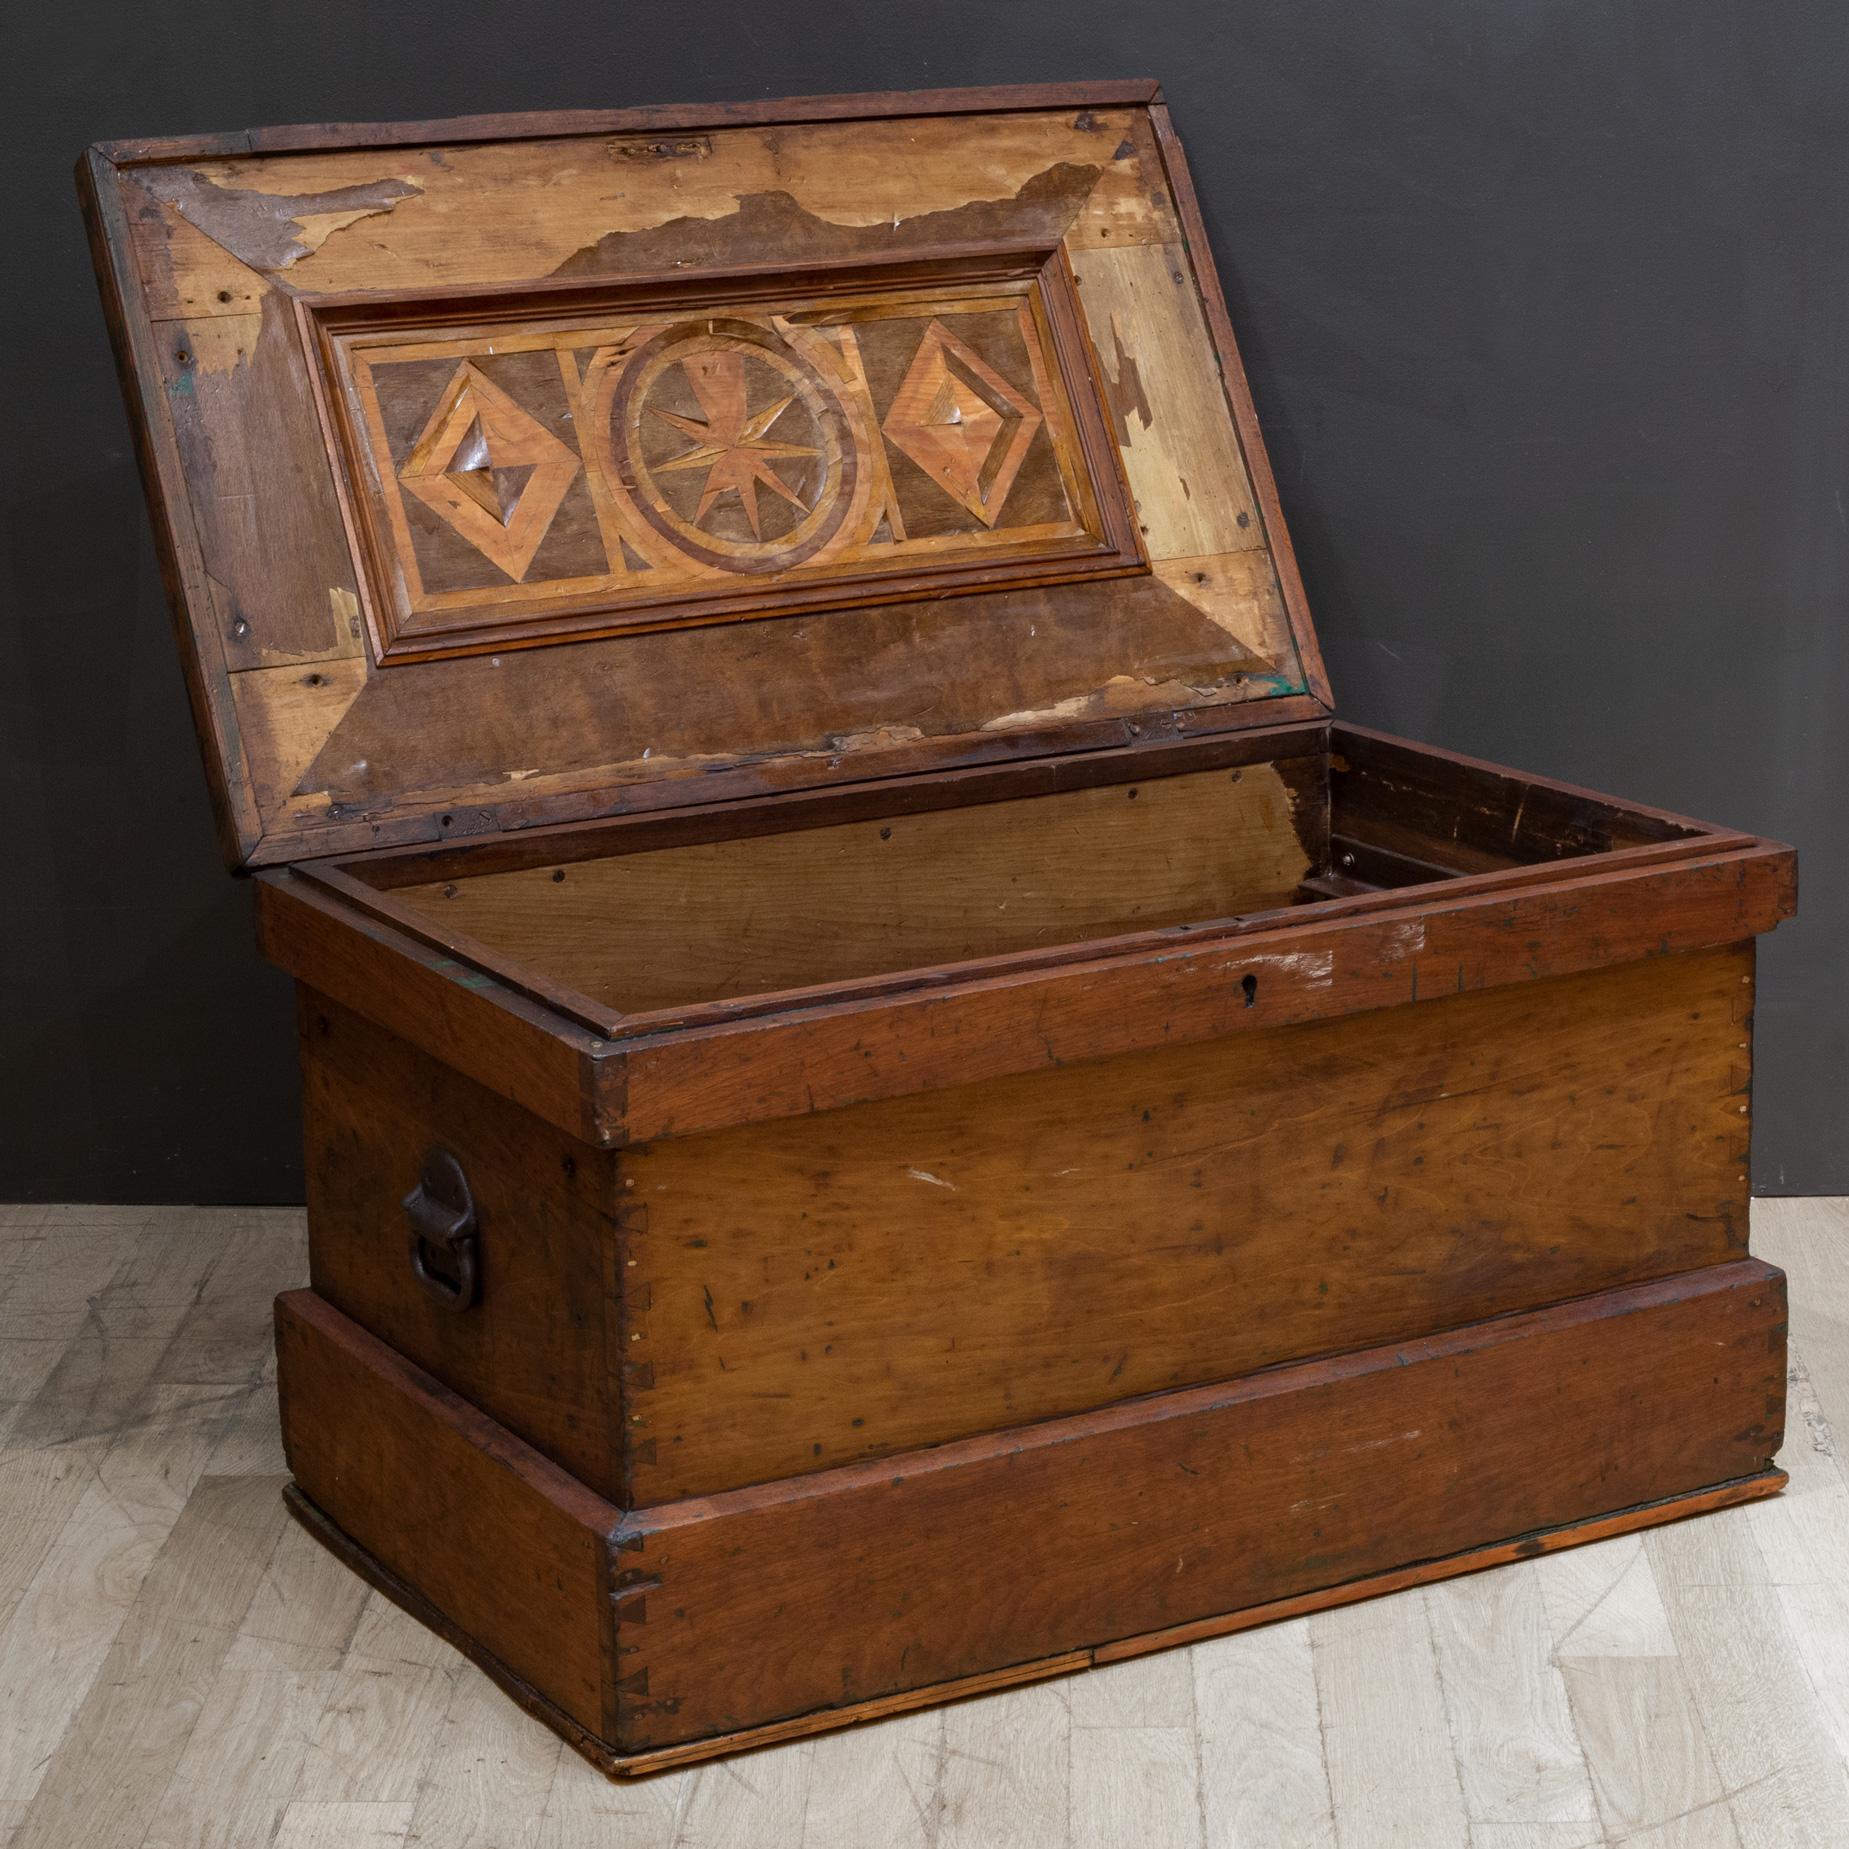 Late Victorian Late 19th / Early 20th C. Blanket Chest, C.1880-1920